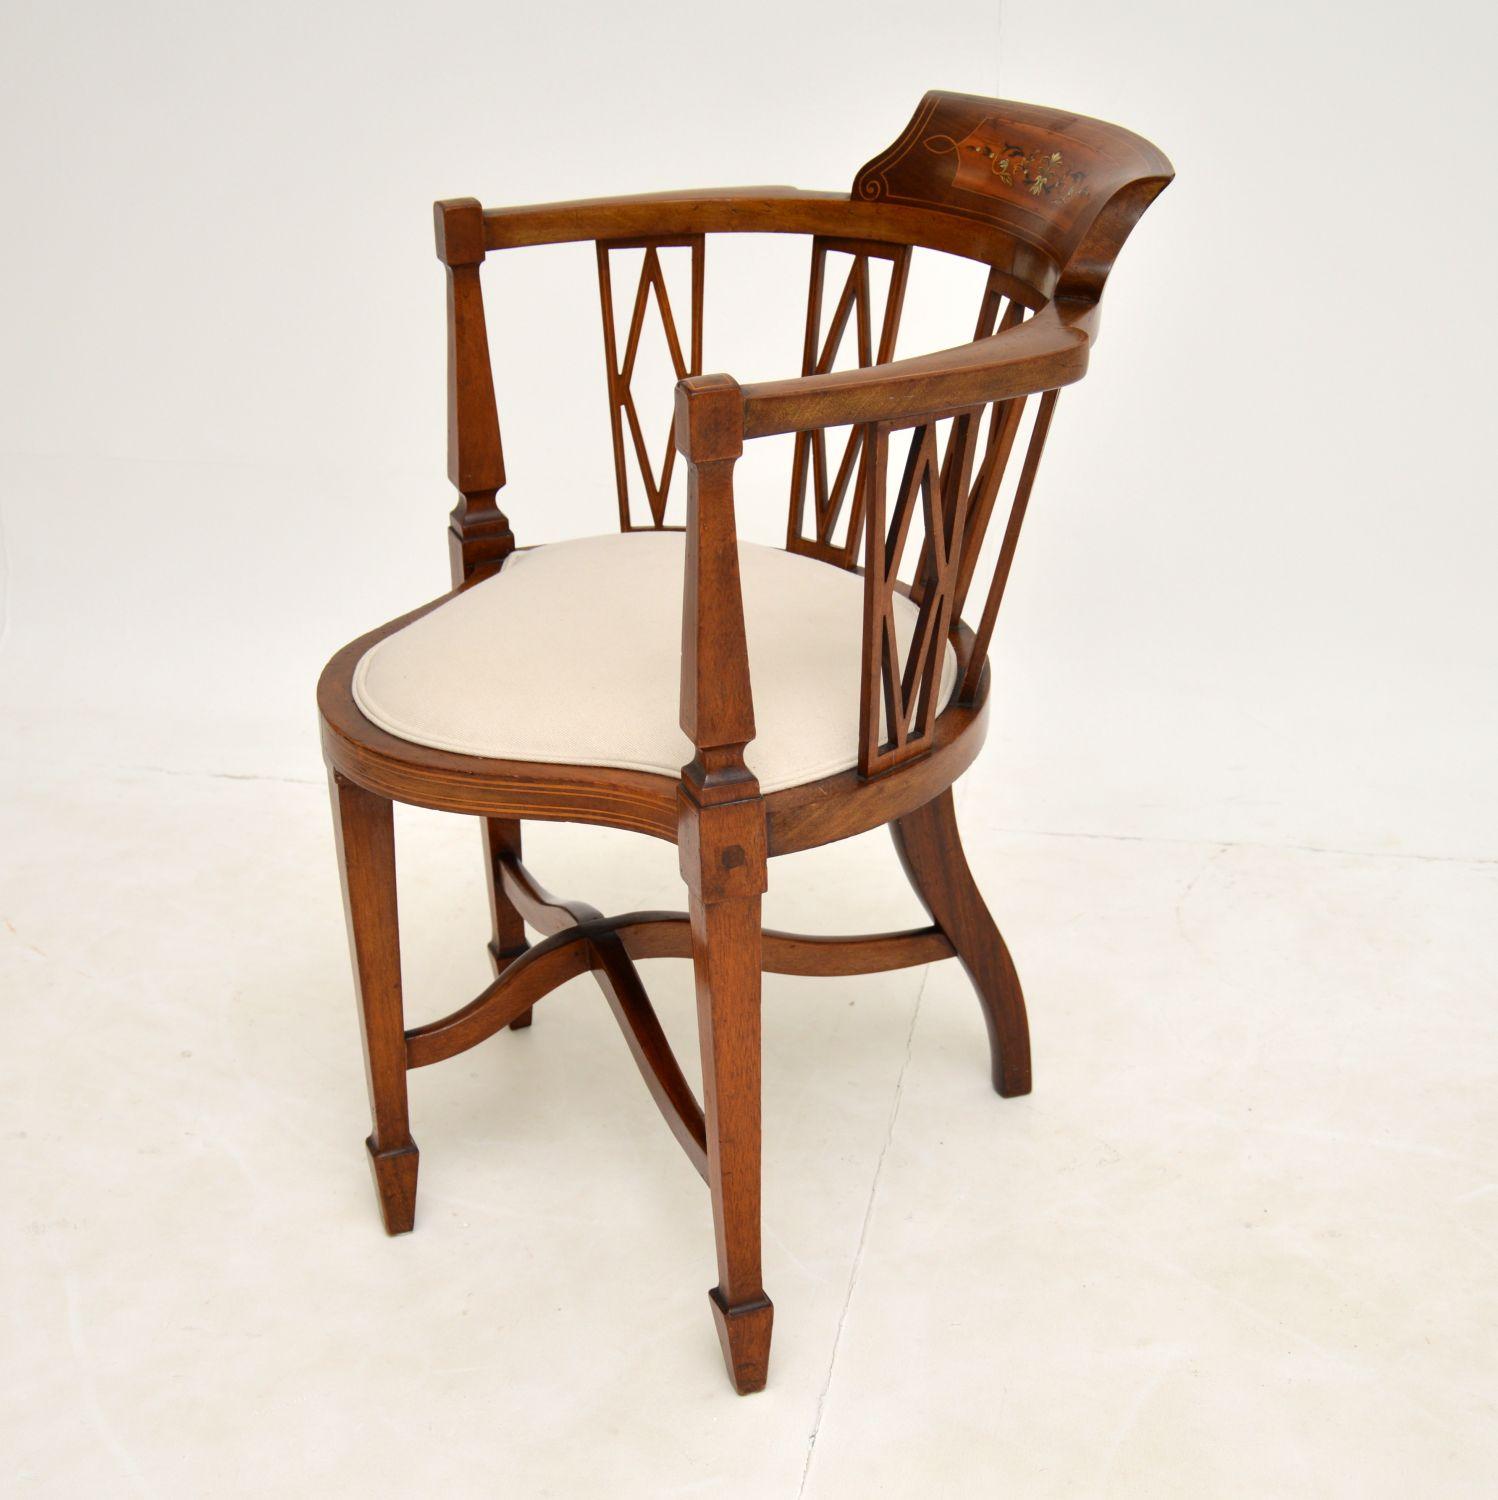 A beautiful antique Edwardian corner chair in mahogany. This dates from the 1890-1900 period, it was made in England.

The frame is beautifully designed and is solid mahogany, with satin wood inlay and mother of pearl inlays on the back rest. The